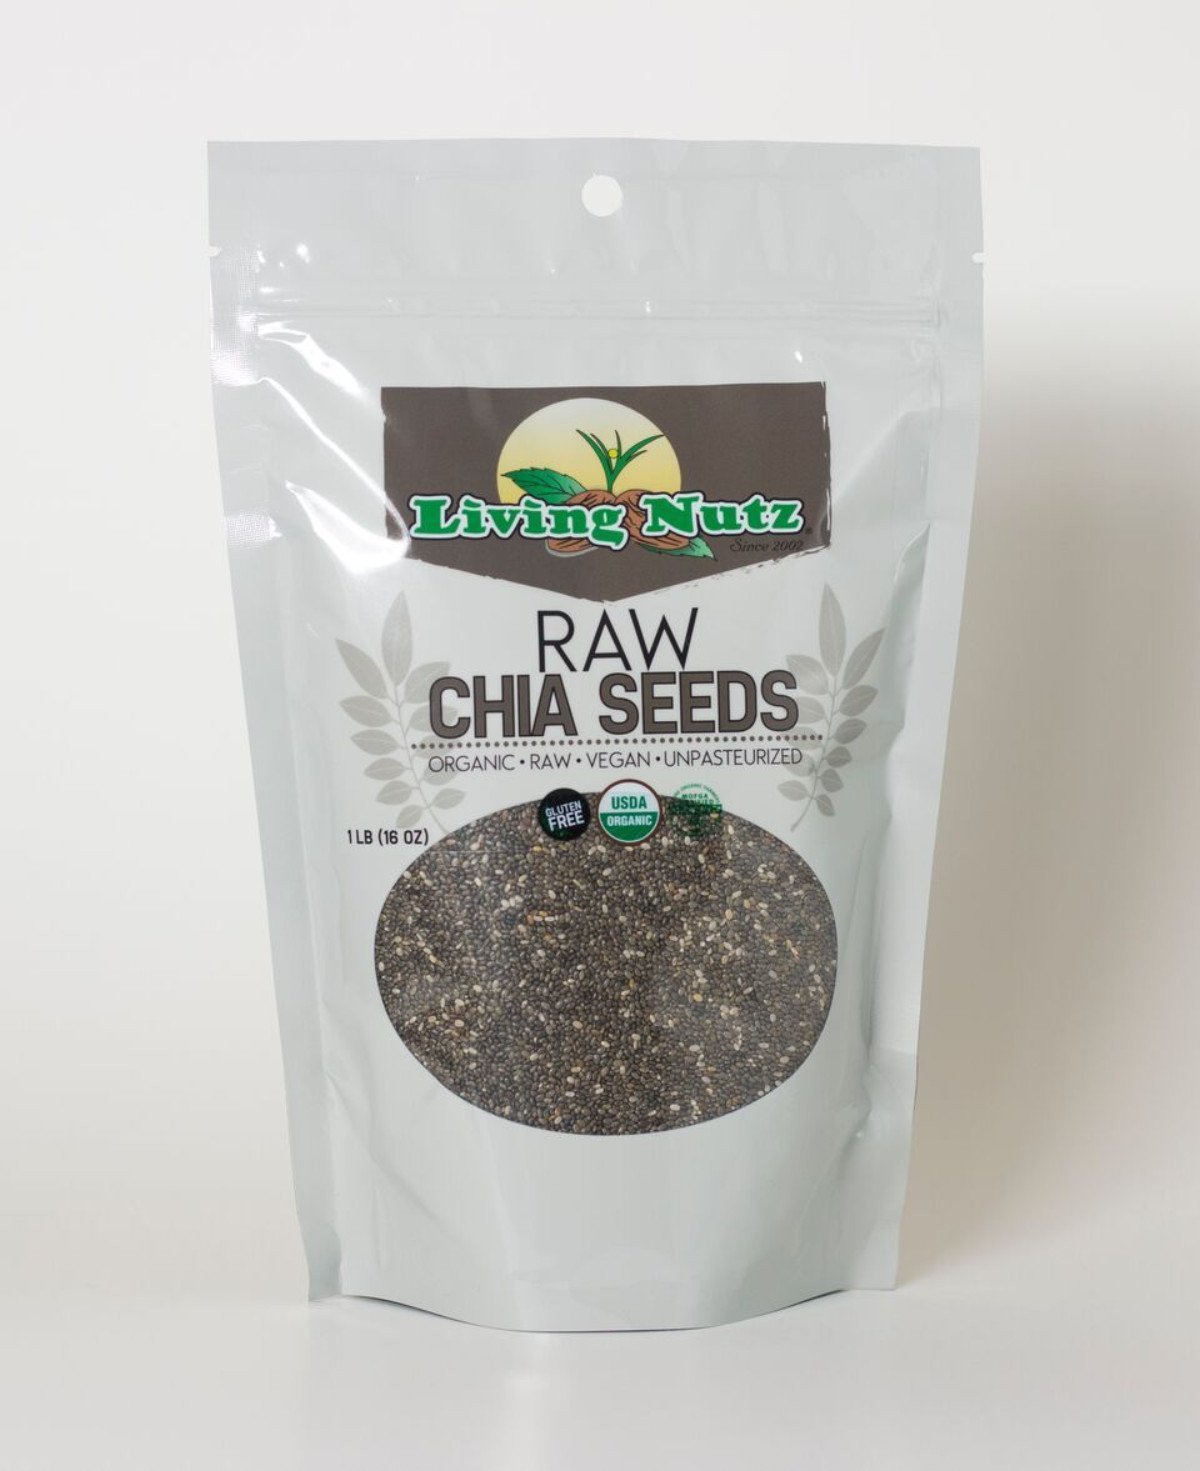 Raw organic chia seeds. Chia seeds for healthy benefits